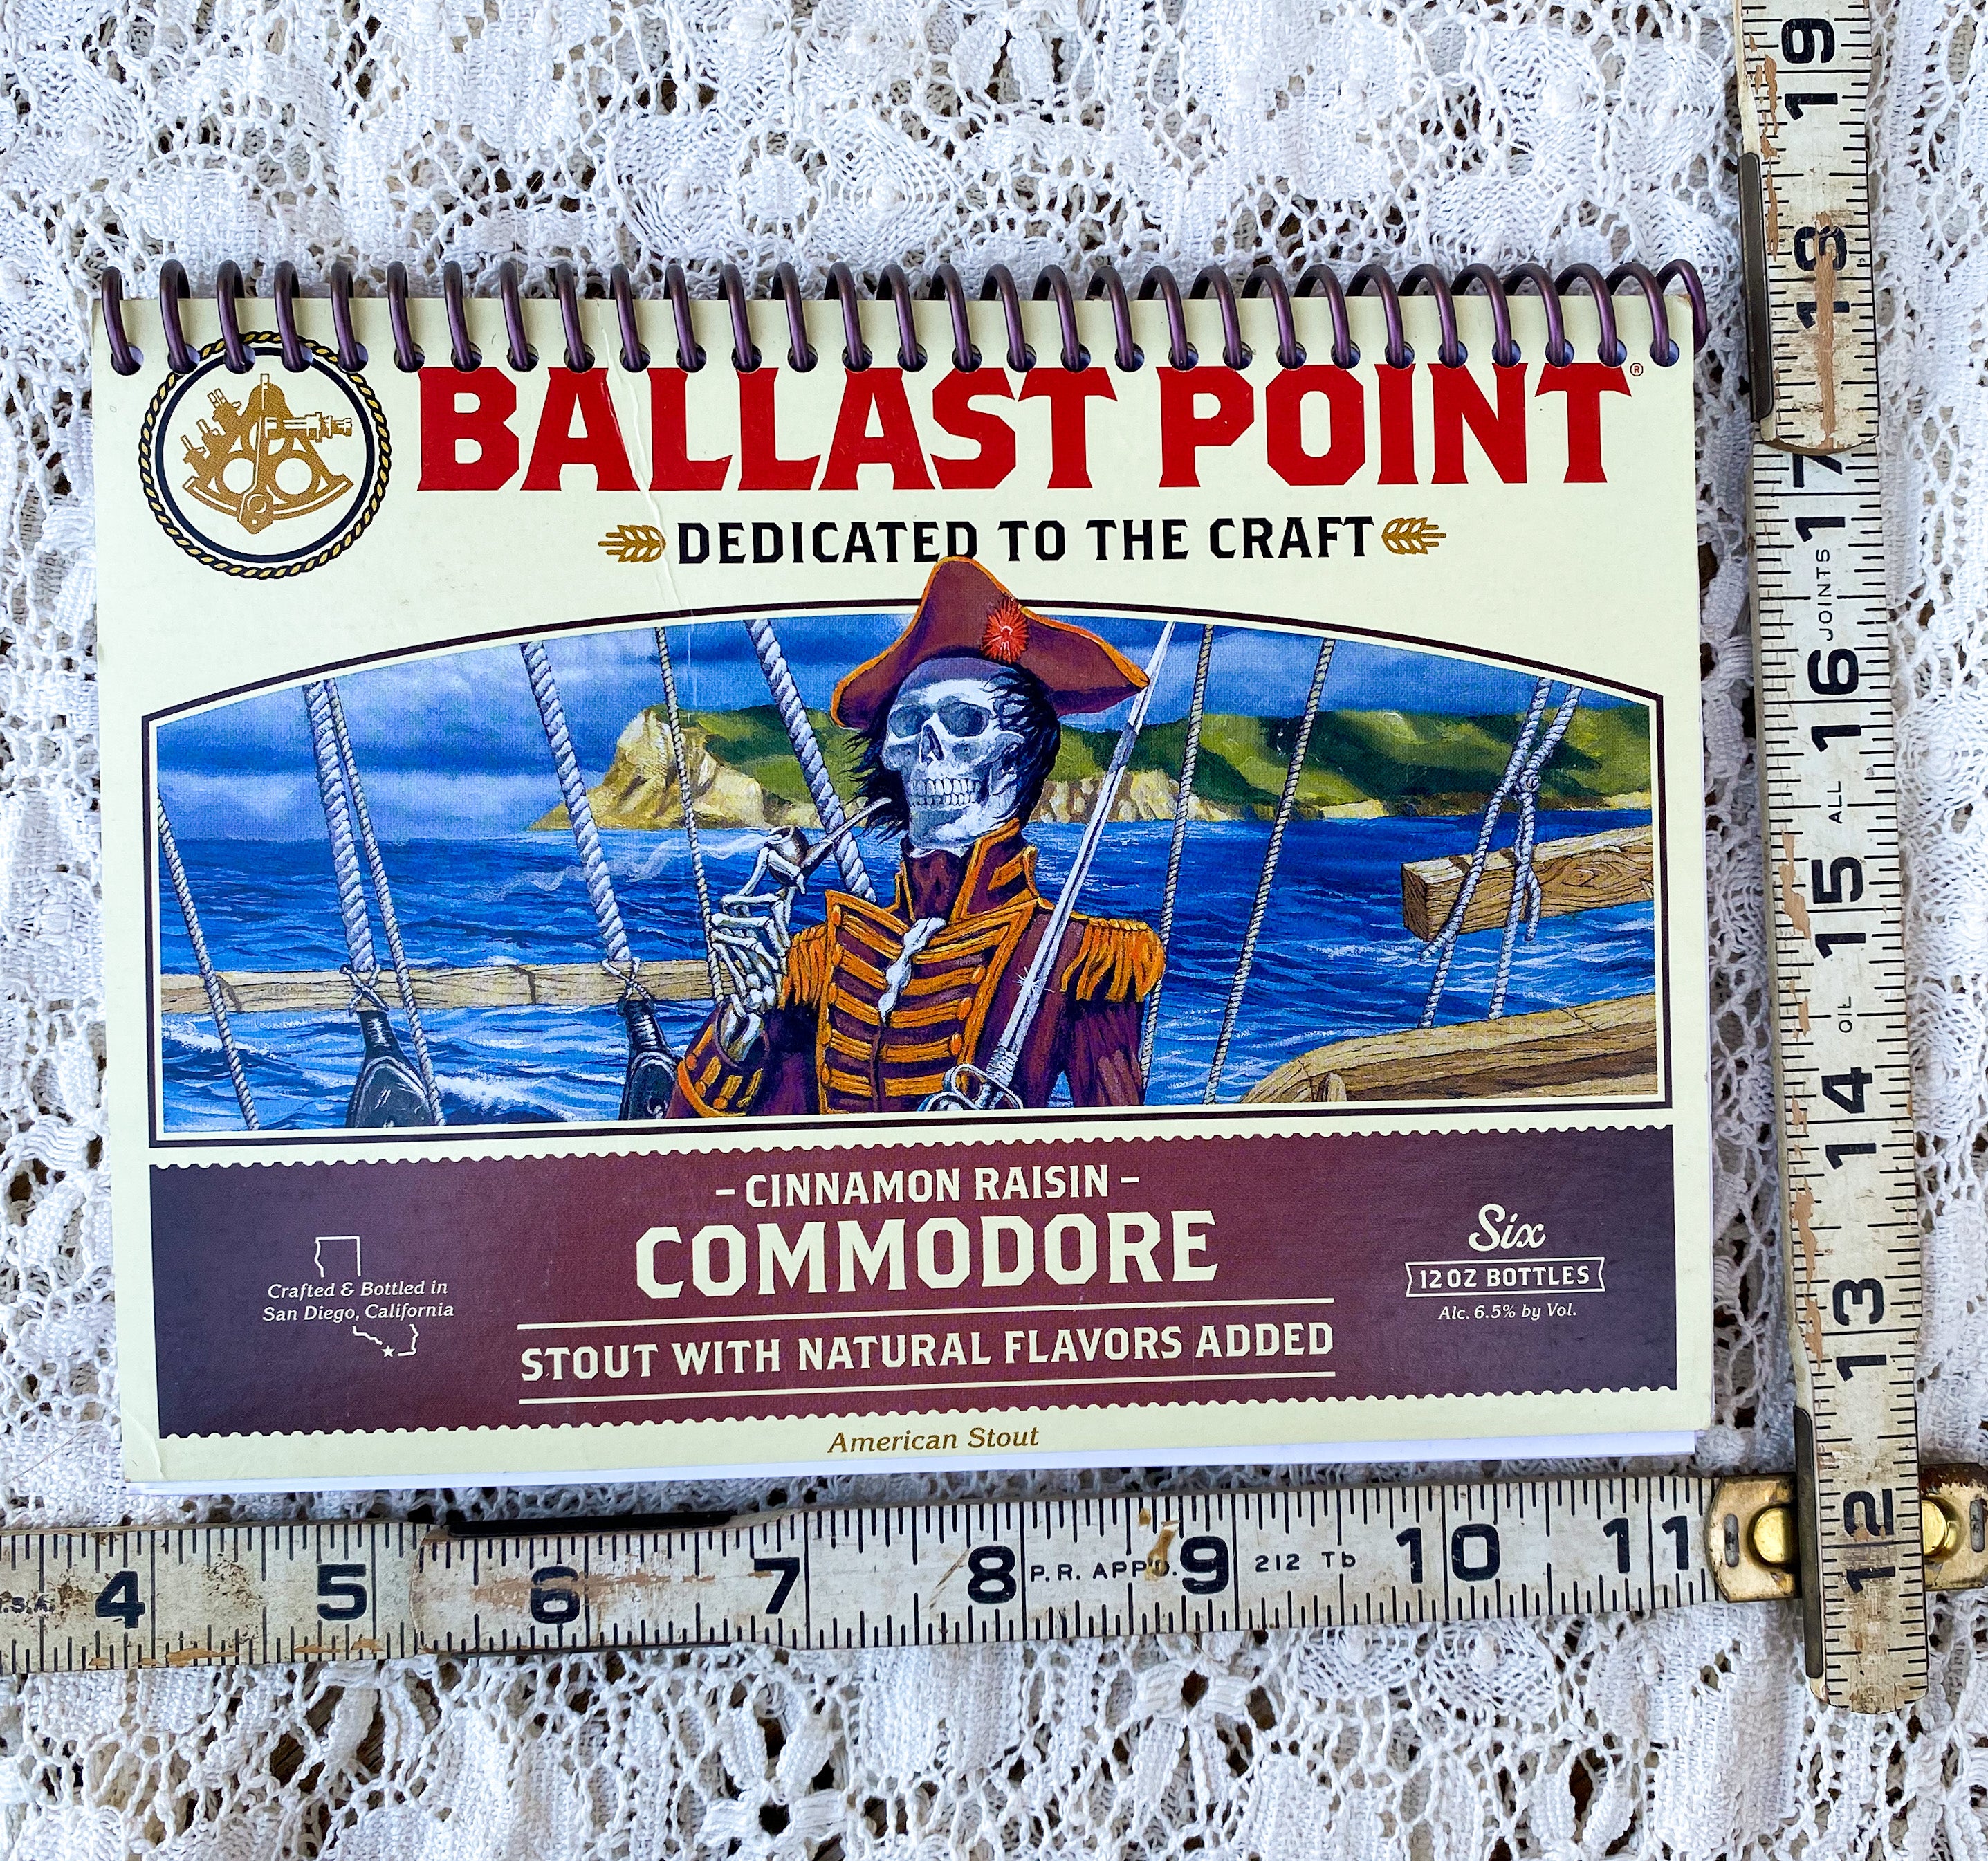 Ballast Point Recycled Beer Carton Notebook